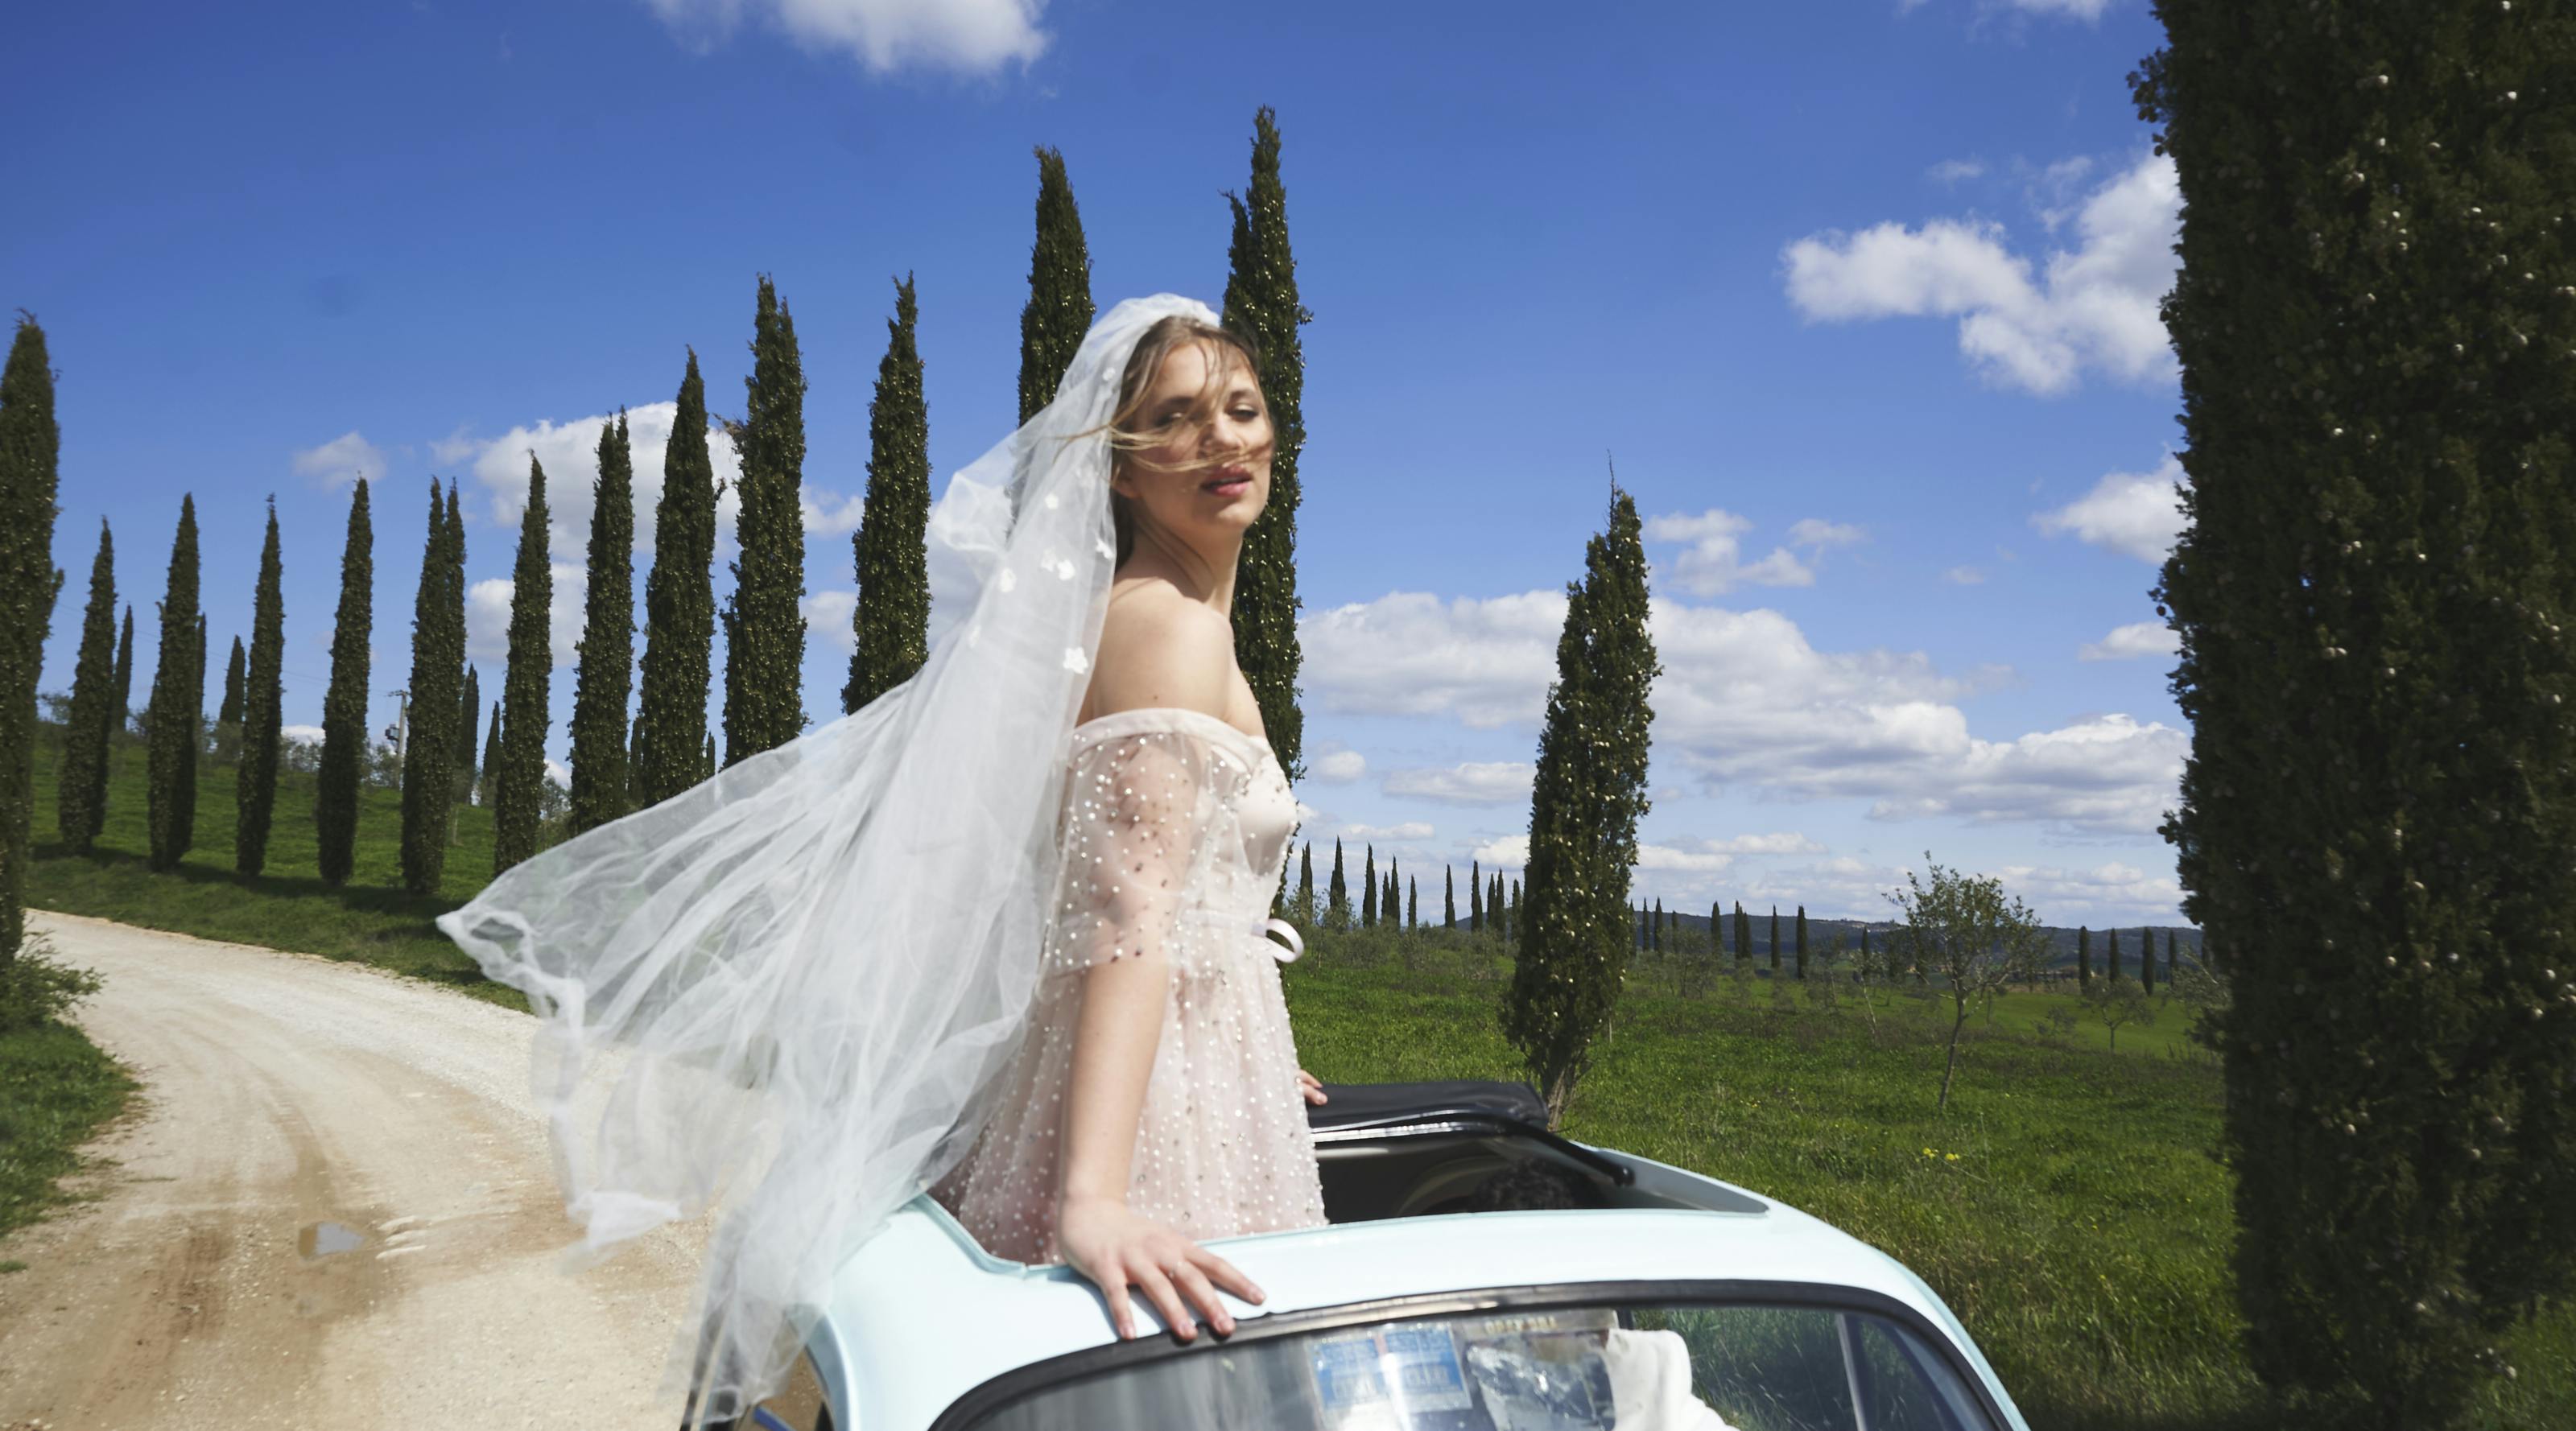 bride on the roof of vintage fiat 500 on a countryside road with blue sky